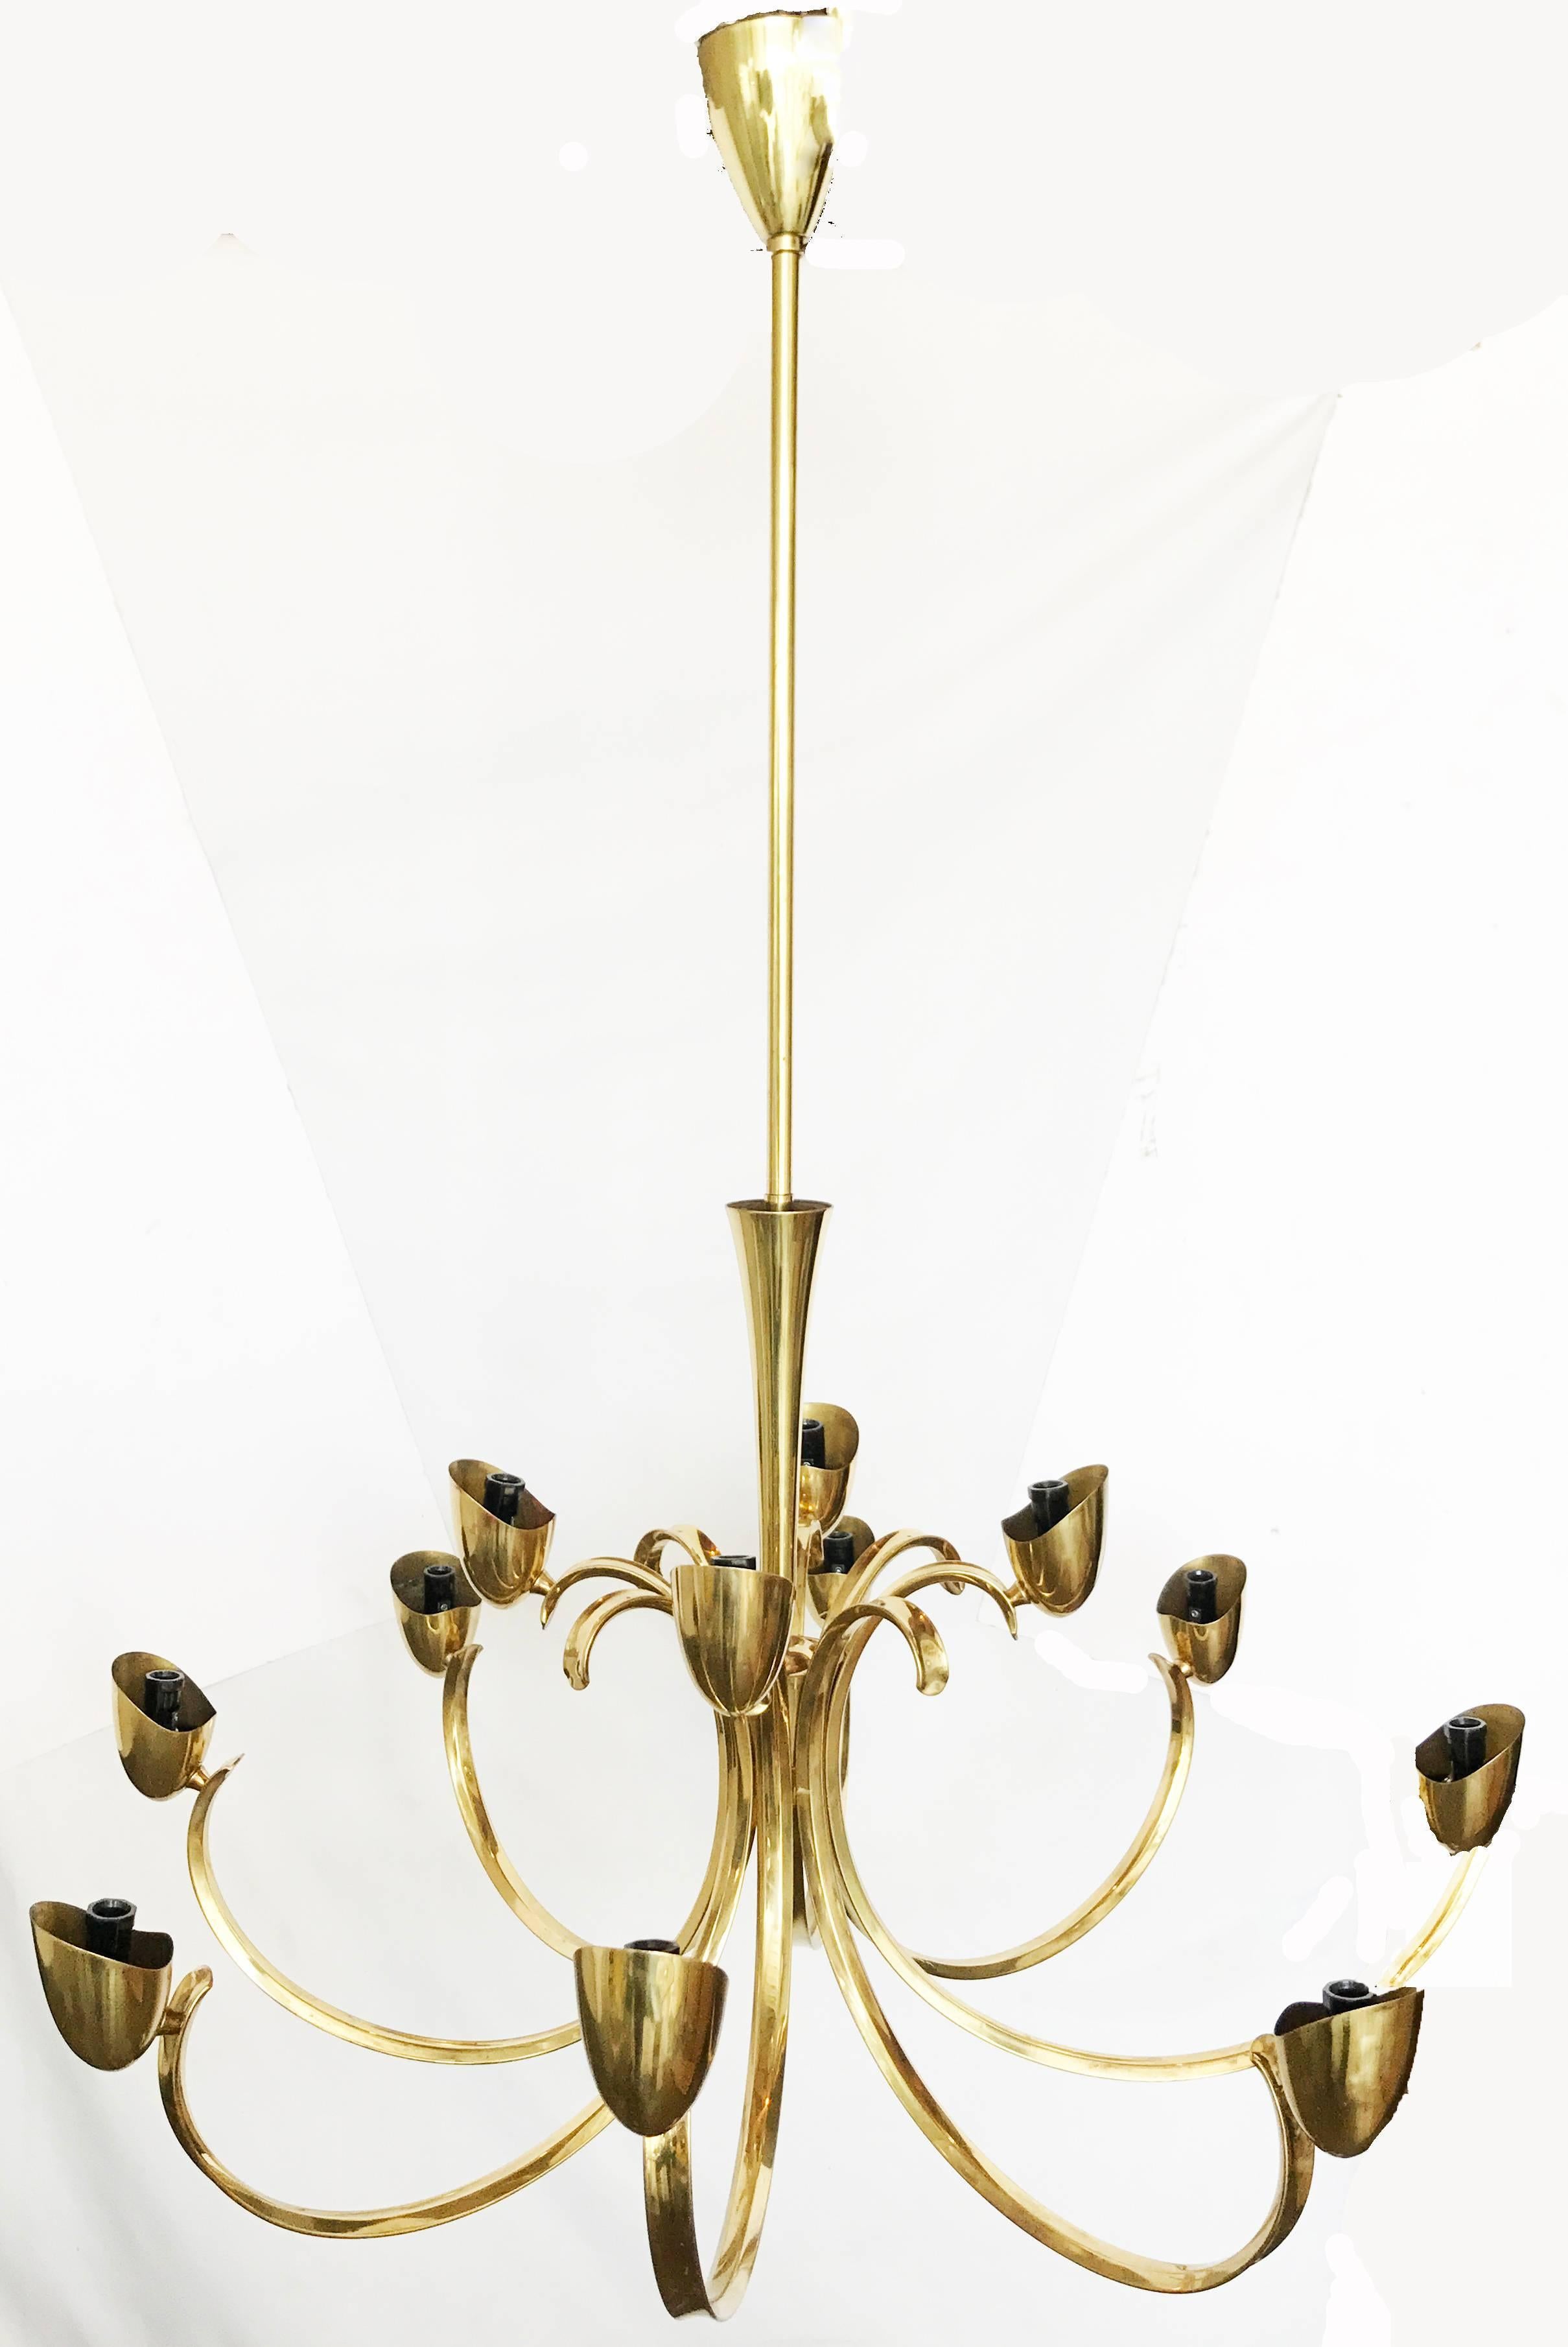 Superb chandelier by Stilnovo, 12 lights .
US rewired and in working condition 
Totally restored and refinished.